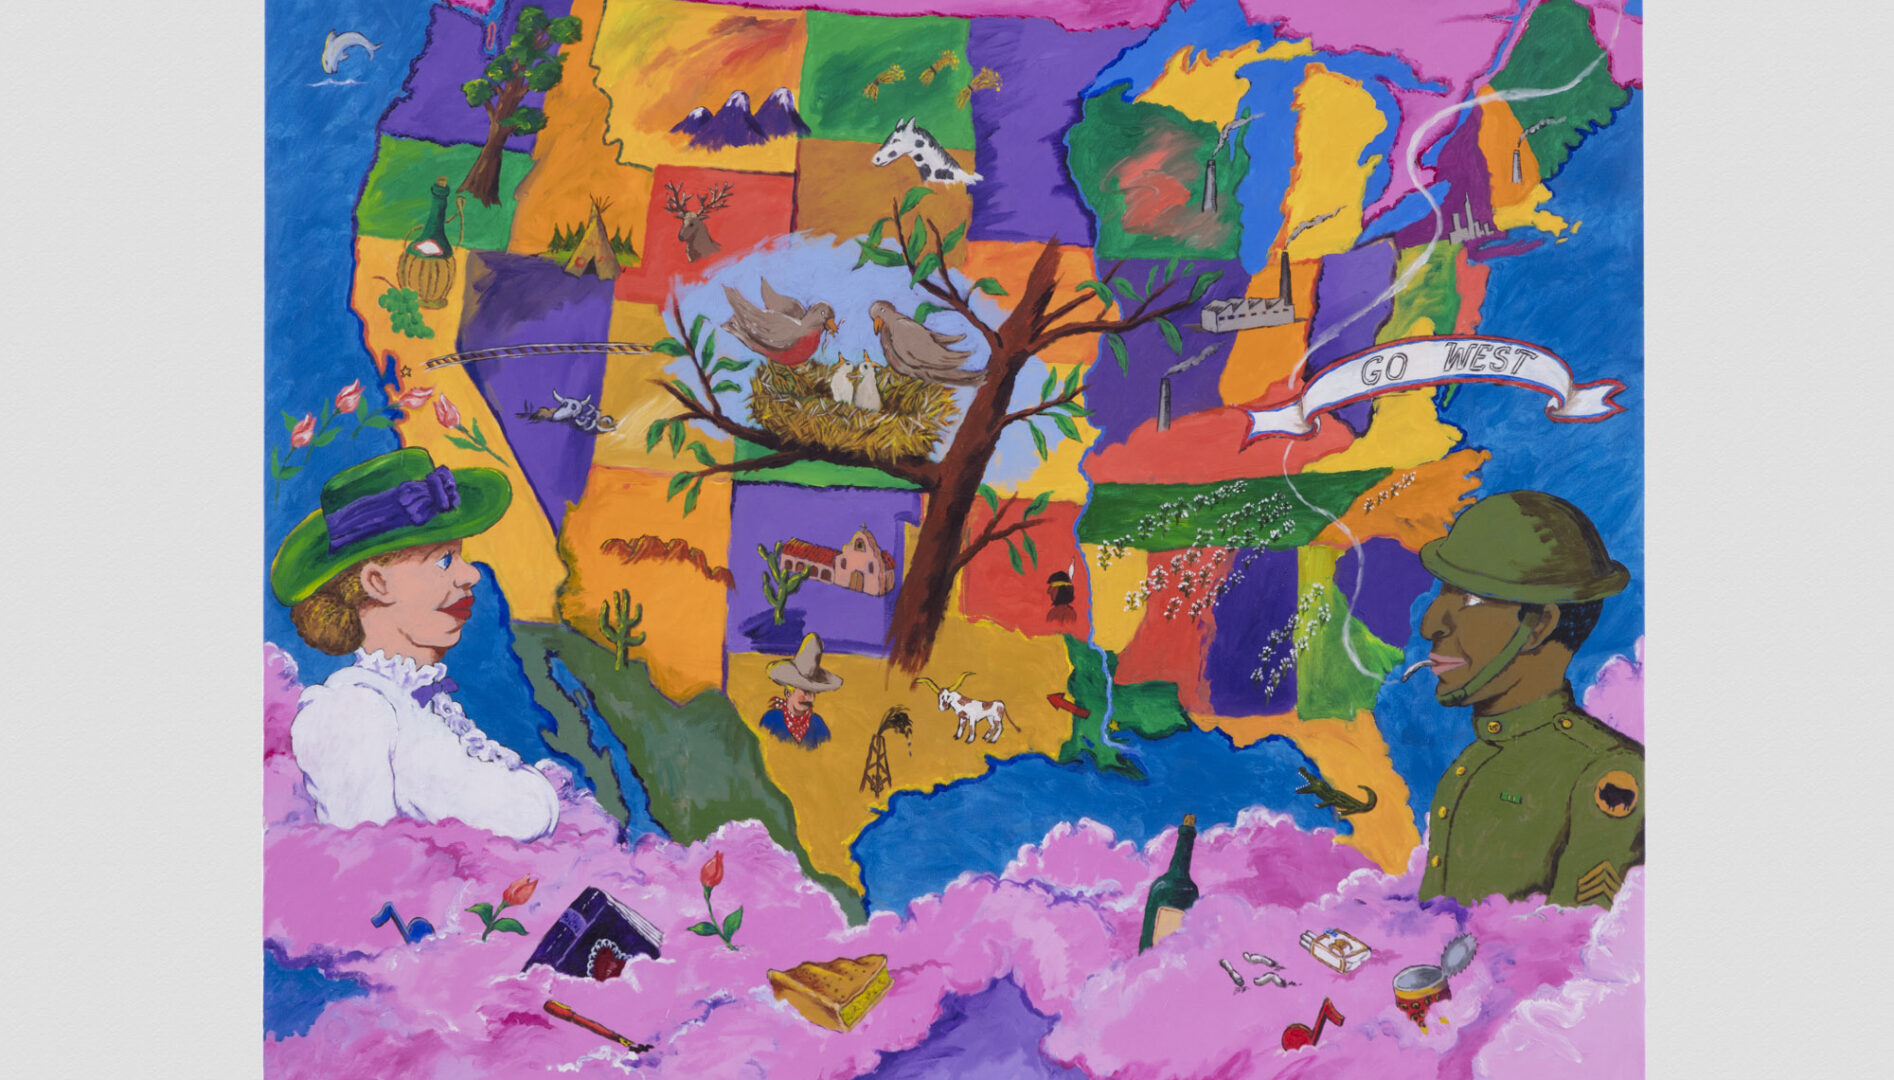 Painting of the map of the United States with pink clouds surrounding and a white woman at the lower left and a Black soldier at the lower right